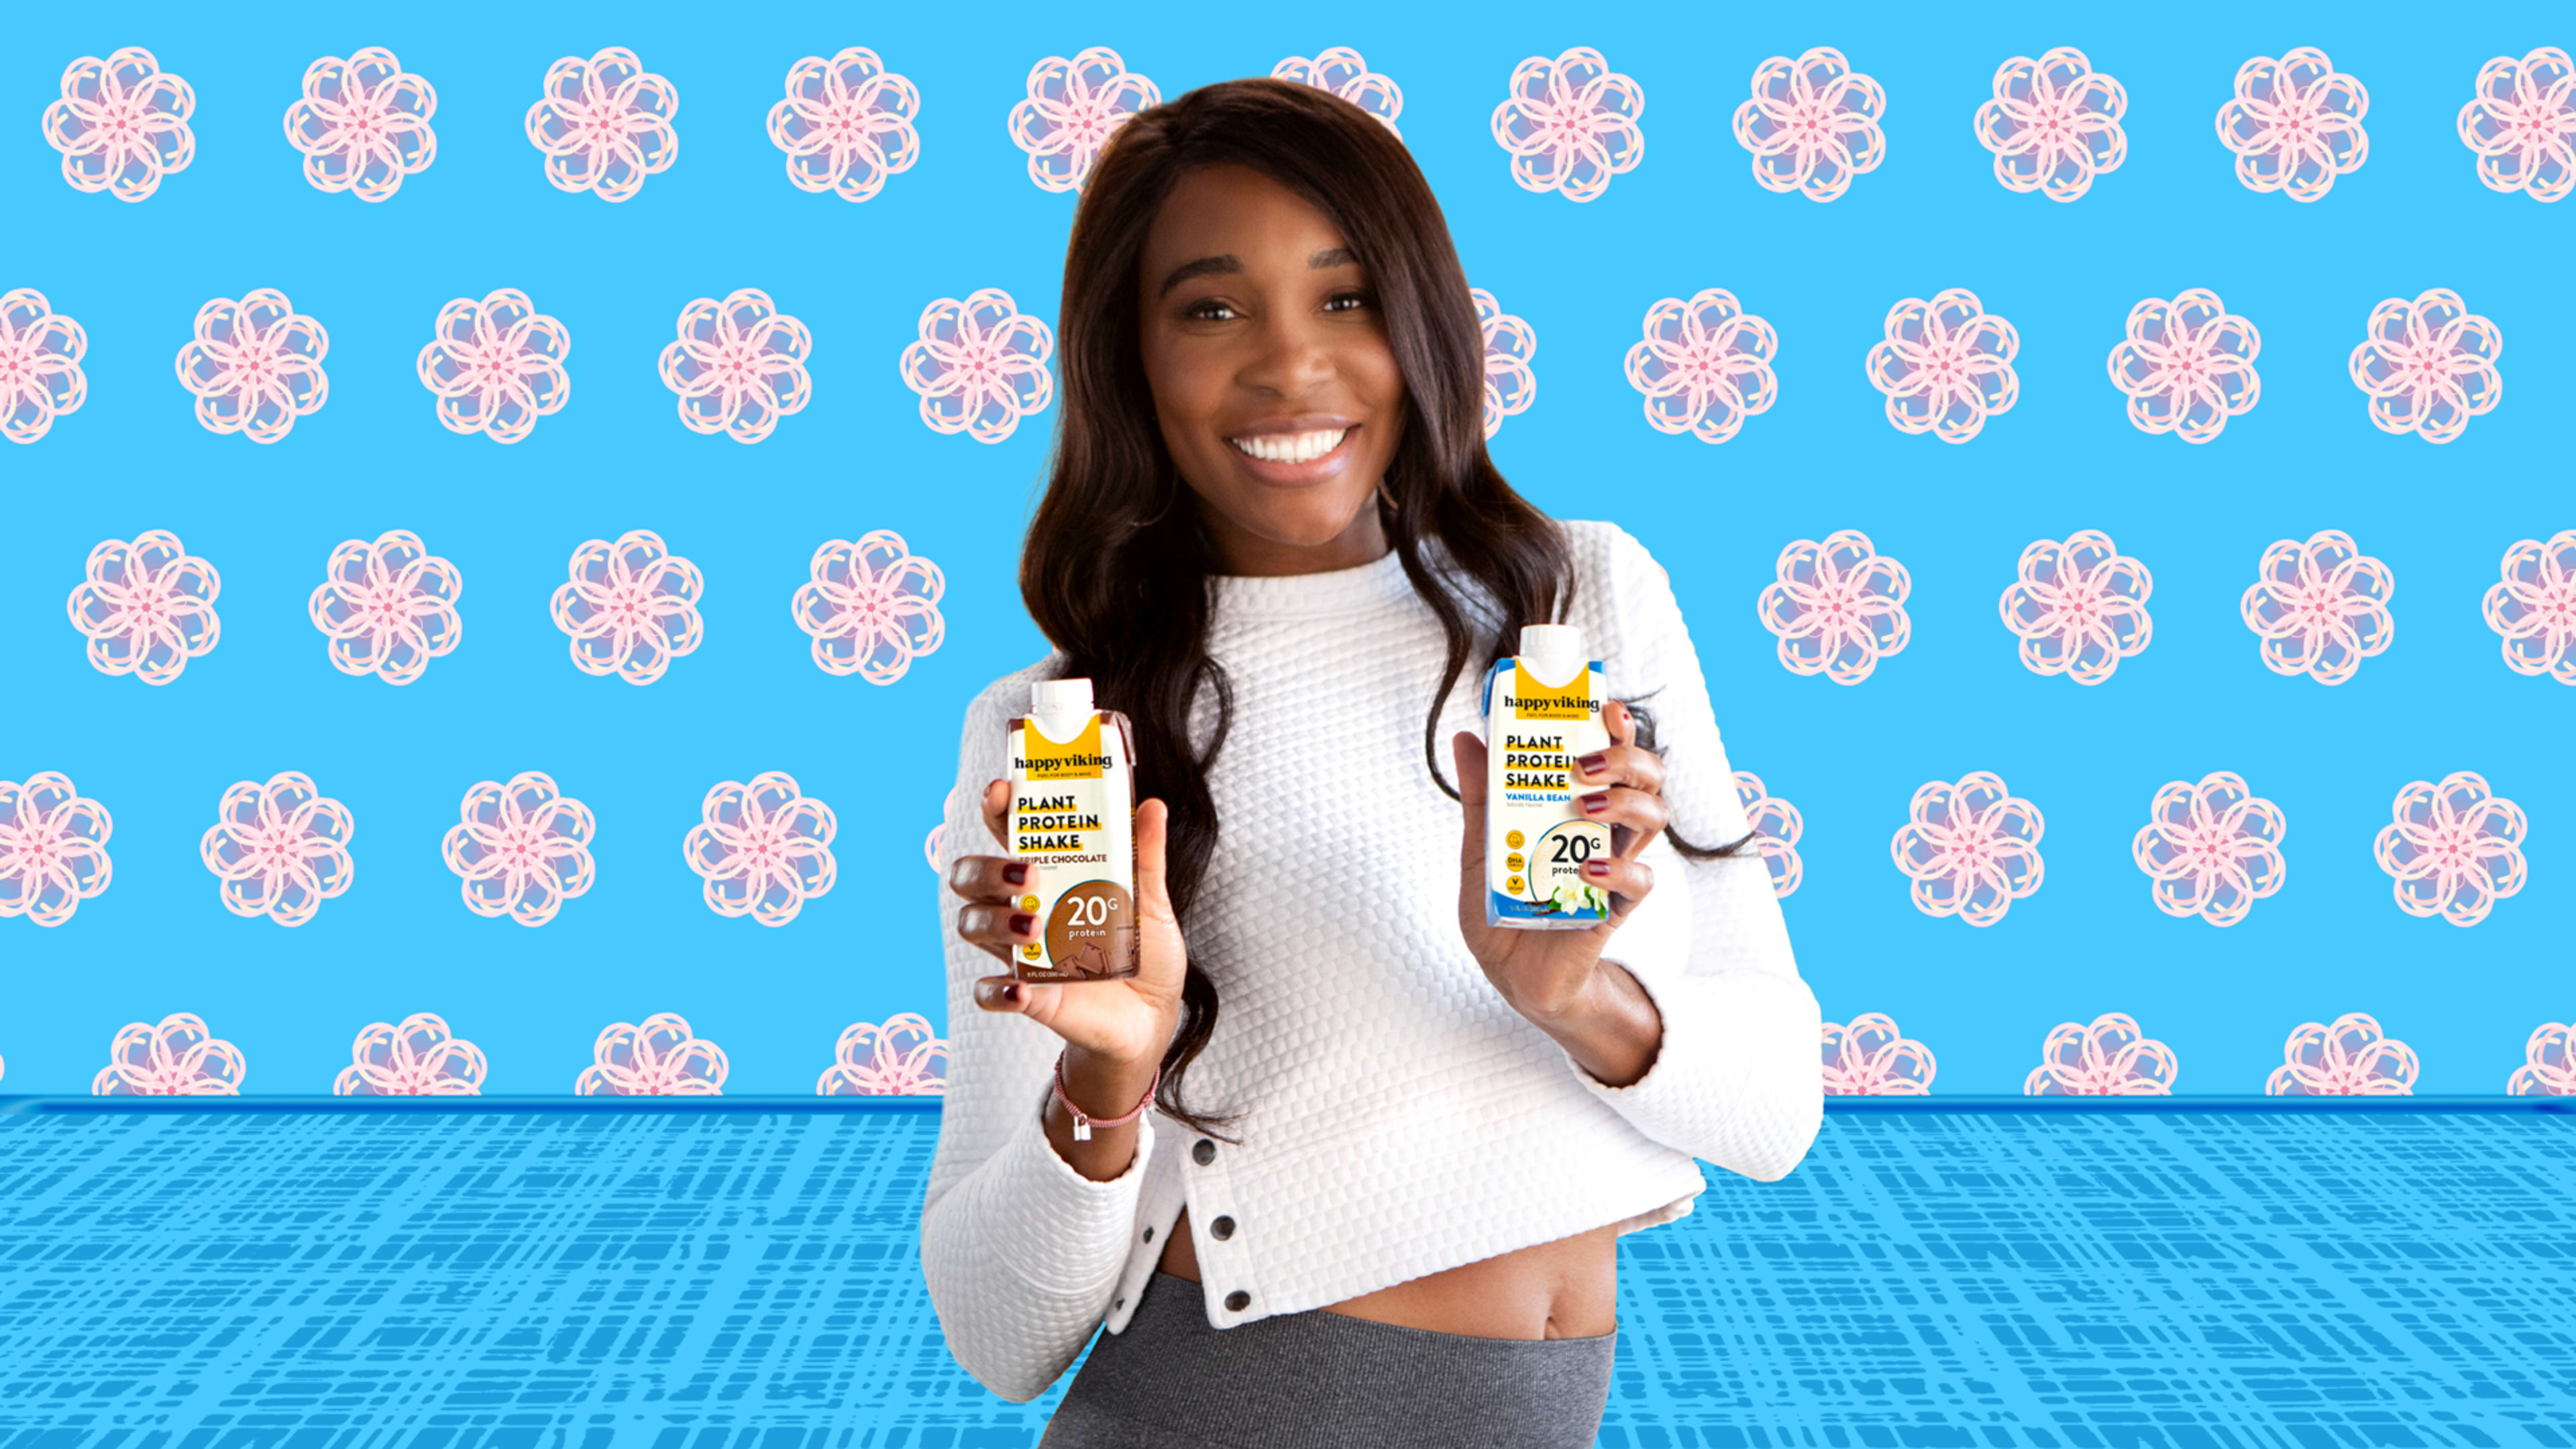 Venus Williams has channeled her vegan diet into a plant-based food company